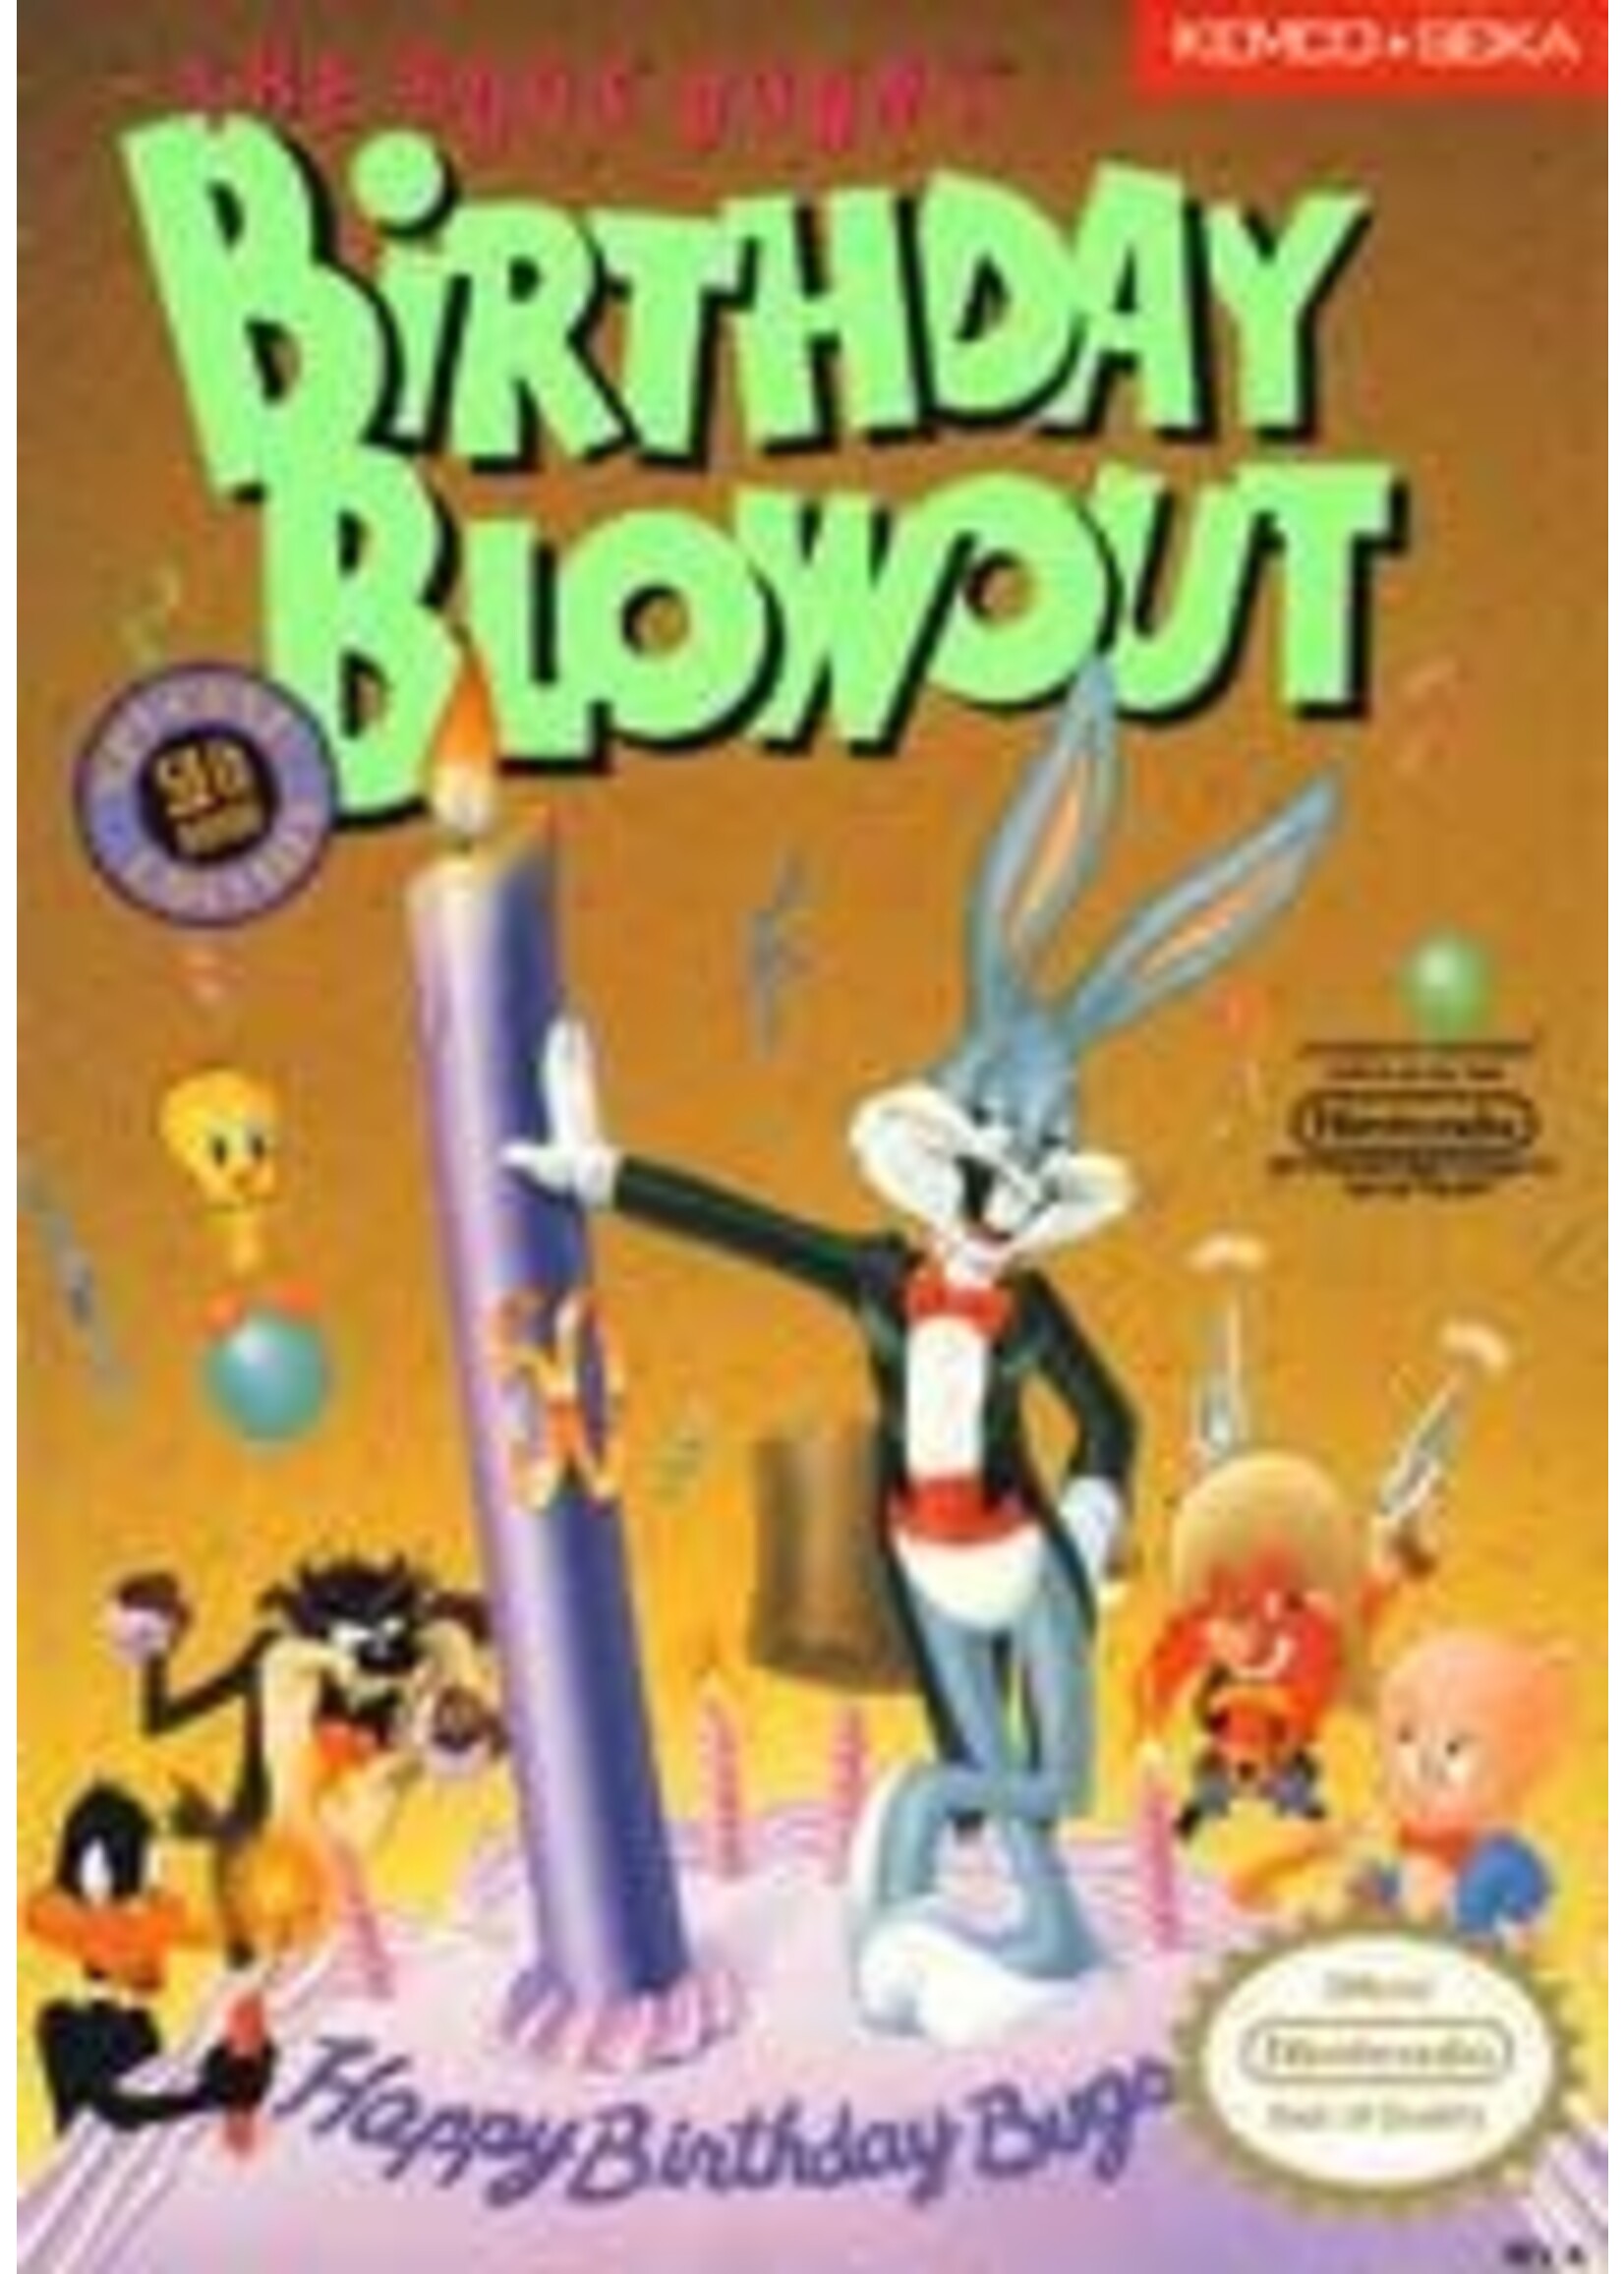 Bugs Bunny Birthday Blowout NES CART ONLY